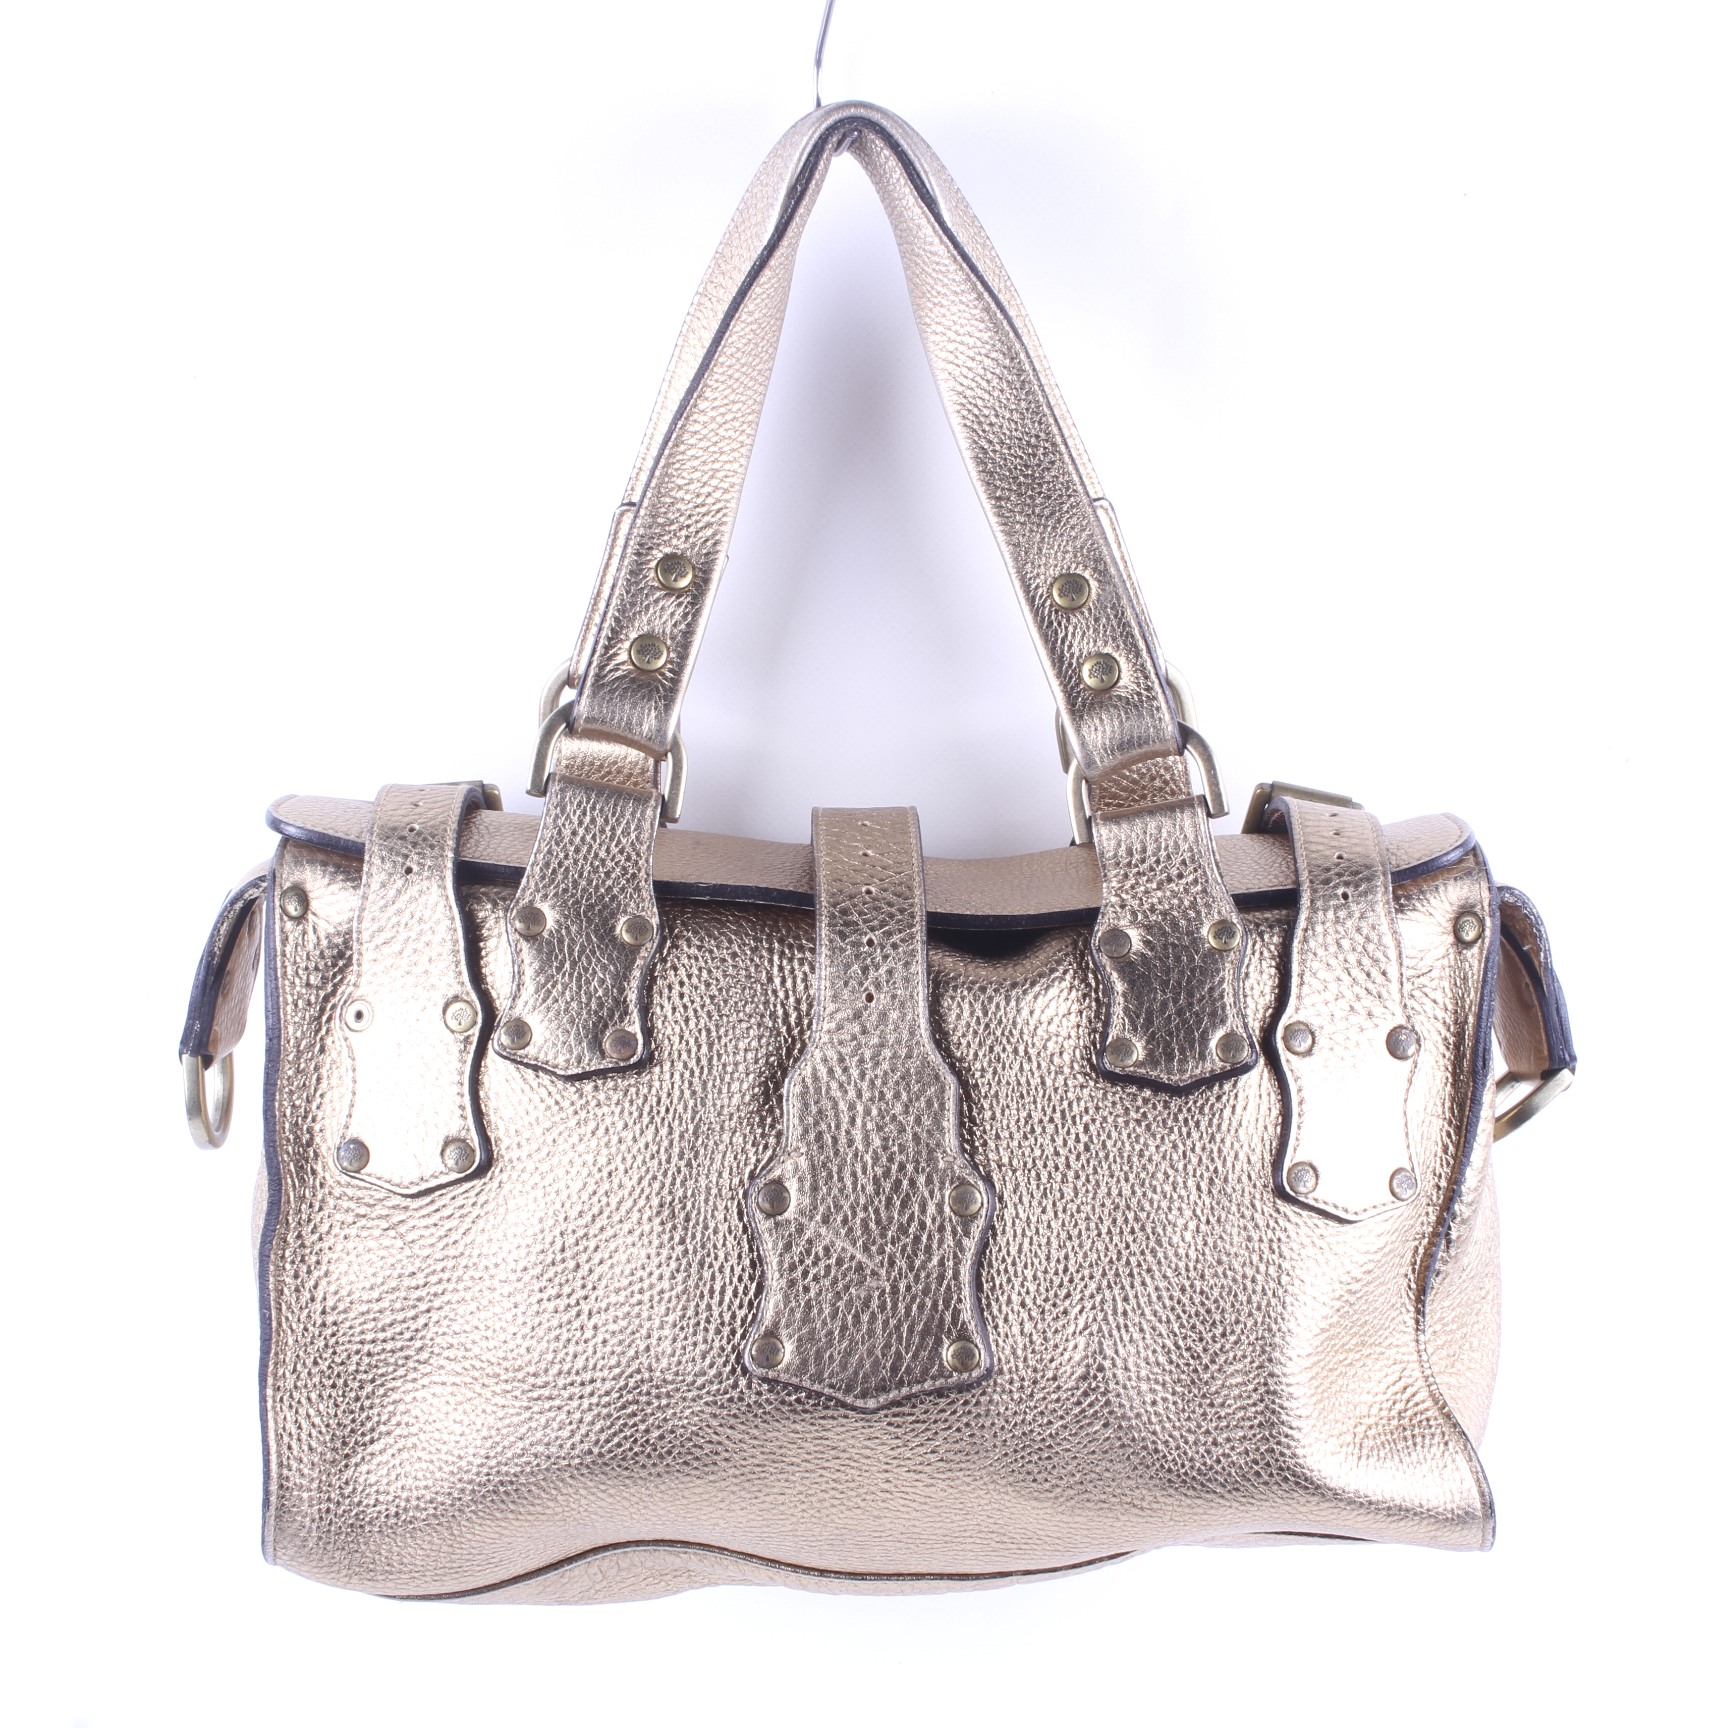 A Mulberry 'Roxanne' metallic gold leather handbag. - Image 2 of 3